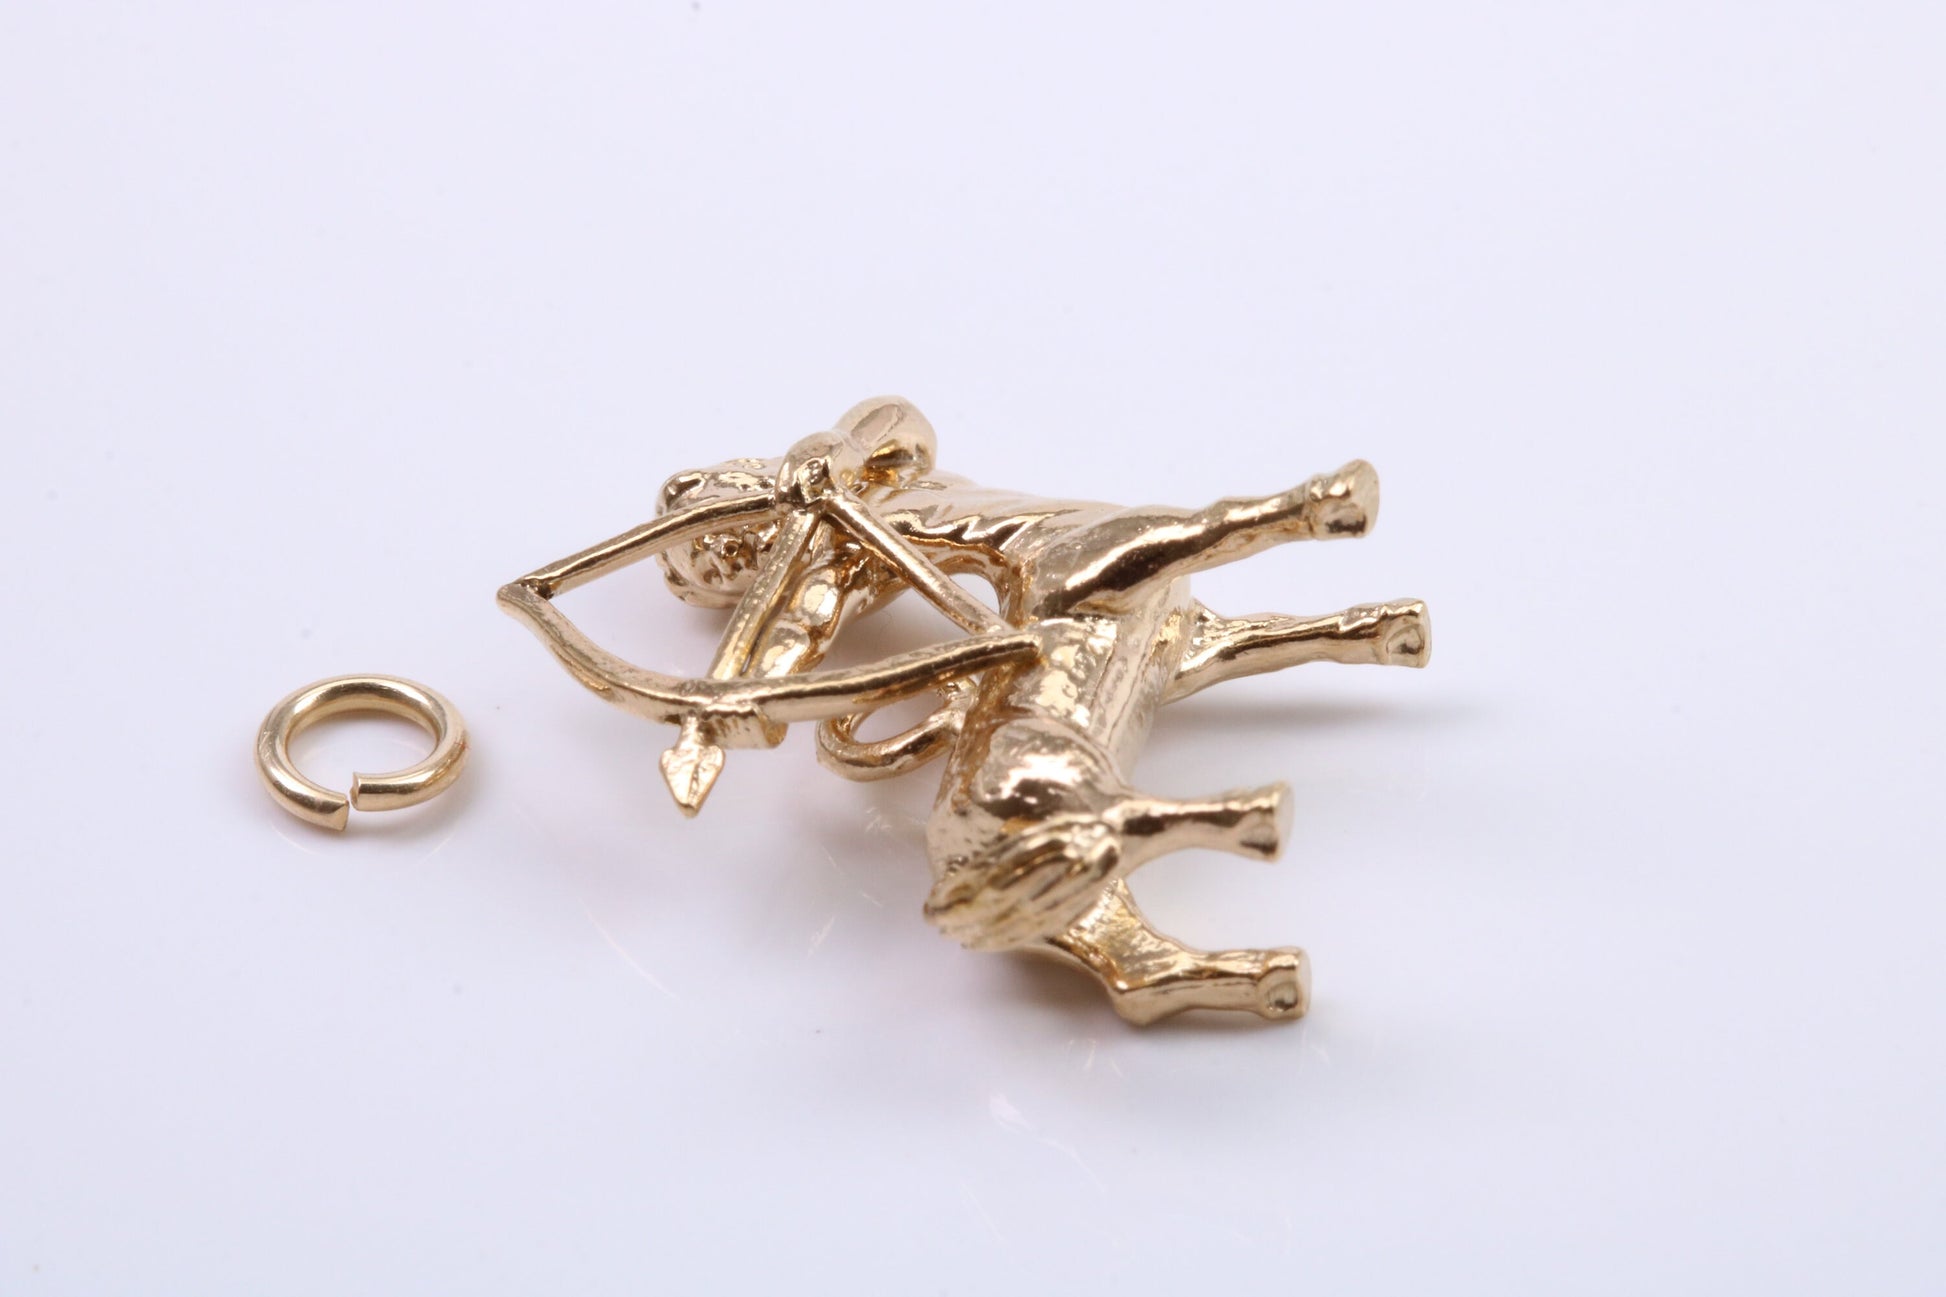 Sagittarius Zodiac Sign Charm, Traditional Charm, Made from Solid 9ct Yellow Gold, British Hallmarked, Complete with Attachment Link